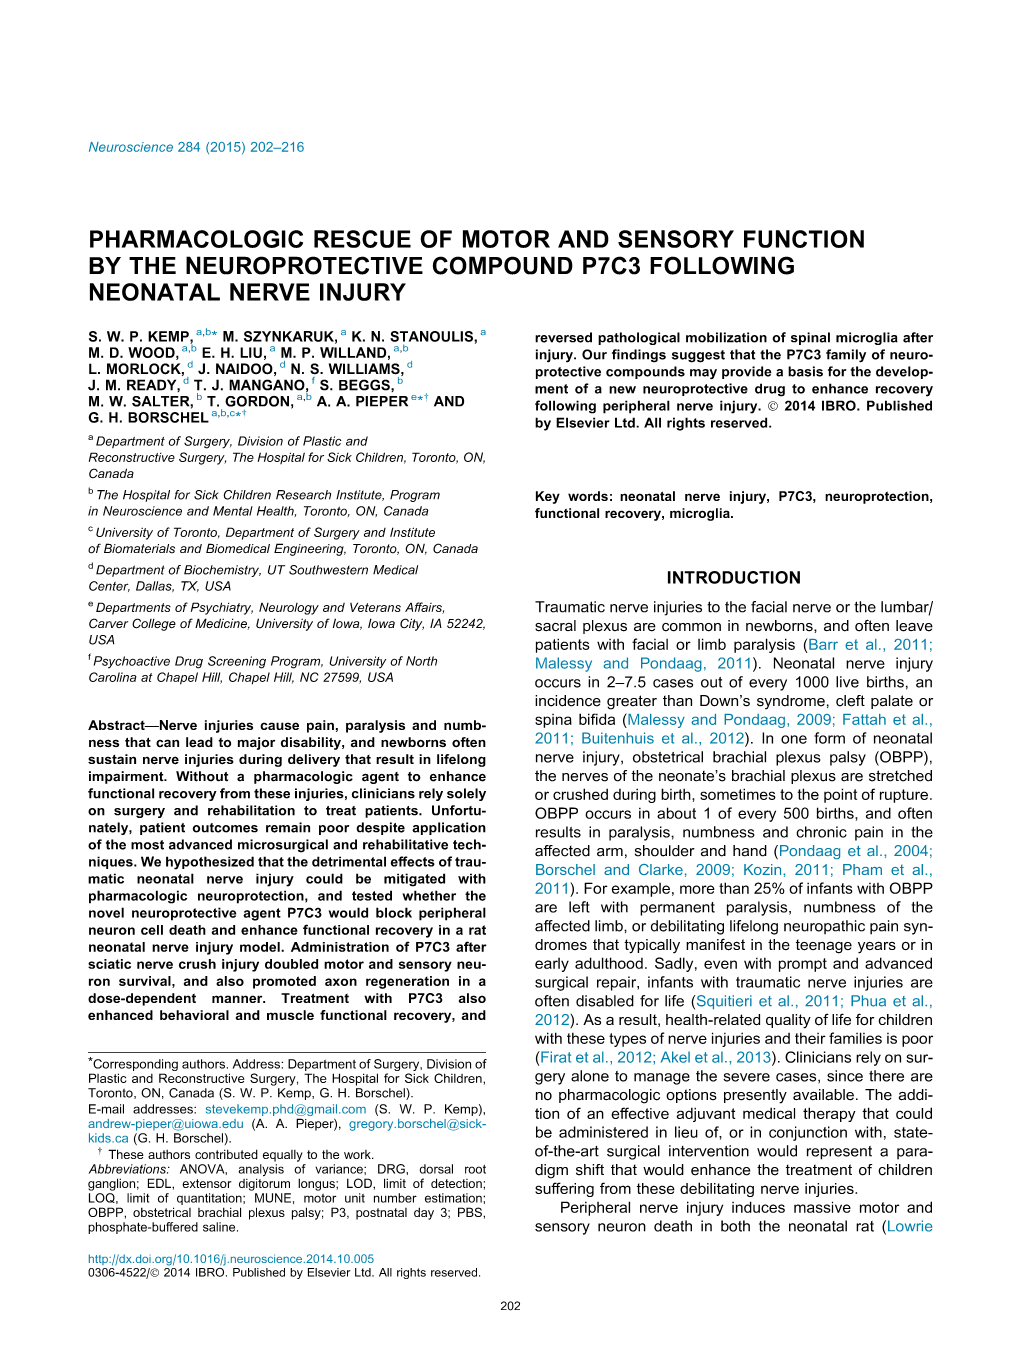 Pharmacologic Rescue of Motor and Sensory Function by the Neuroprotective Compound P7c3 Following Neonatal Nerve Injury